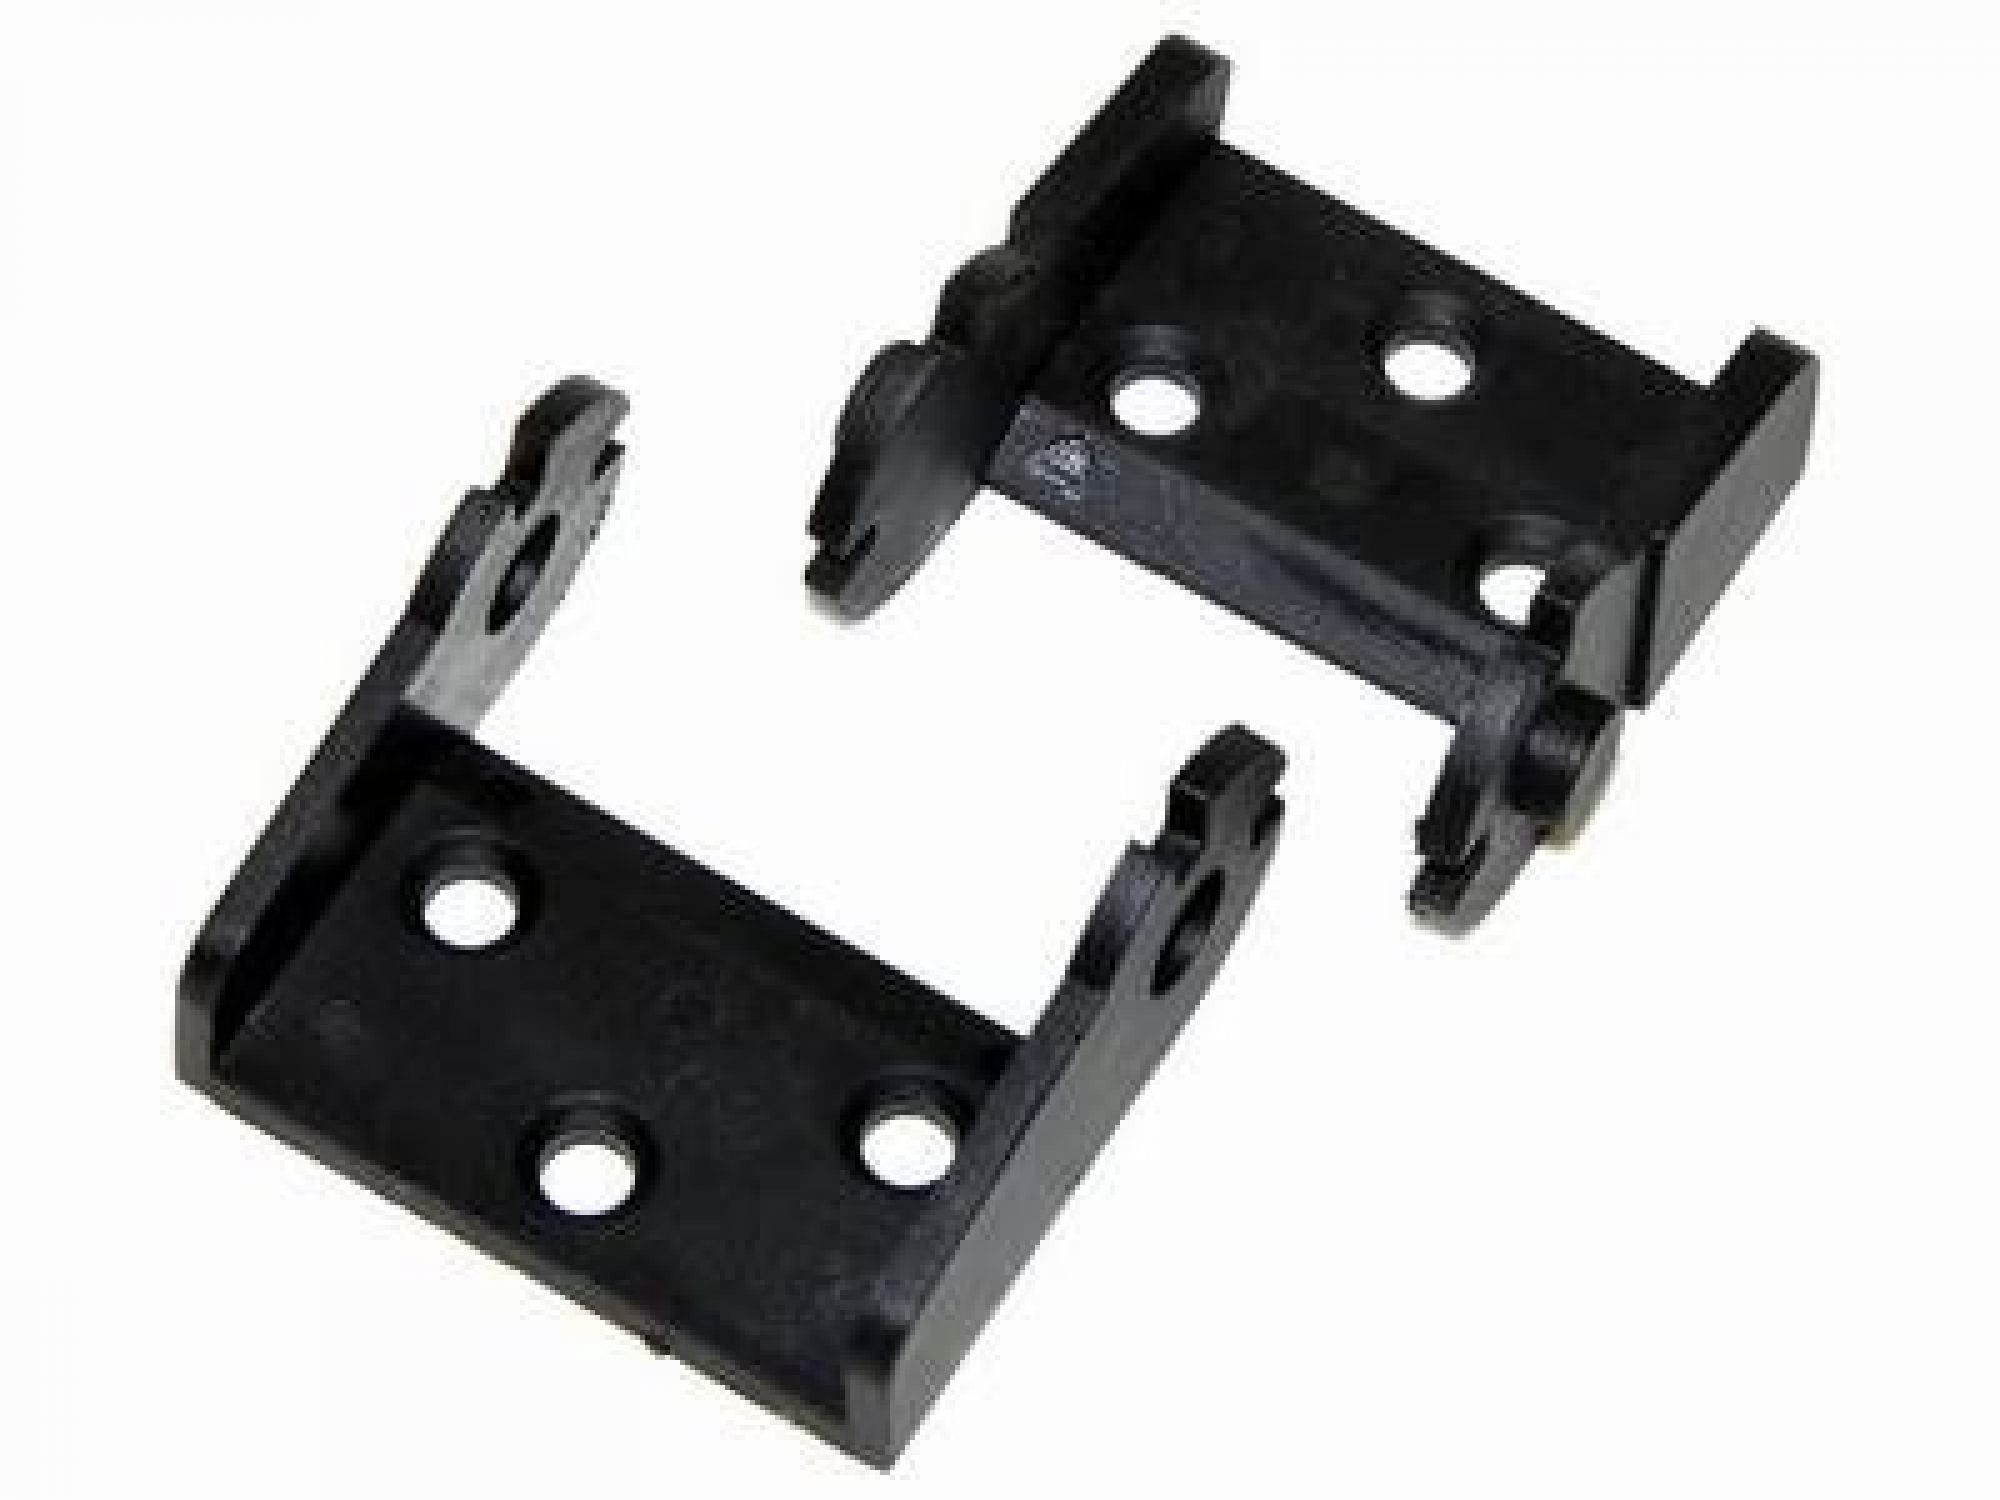 Connection Kit for Drag Chain 18 x 37 mm